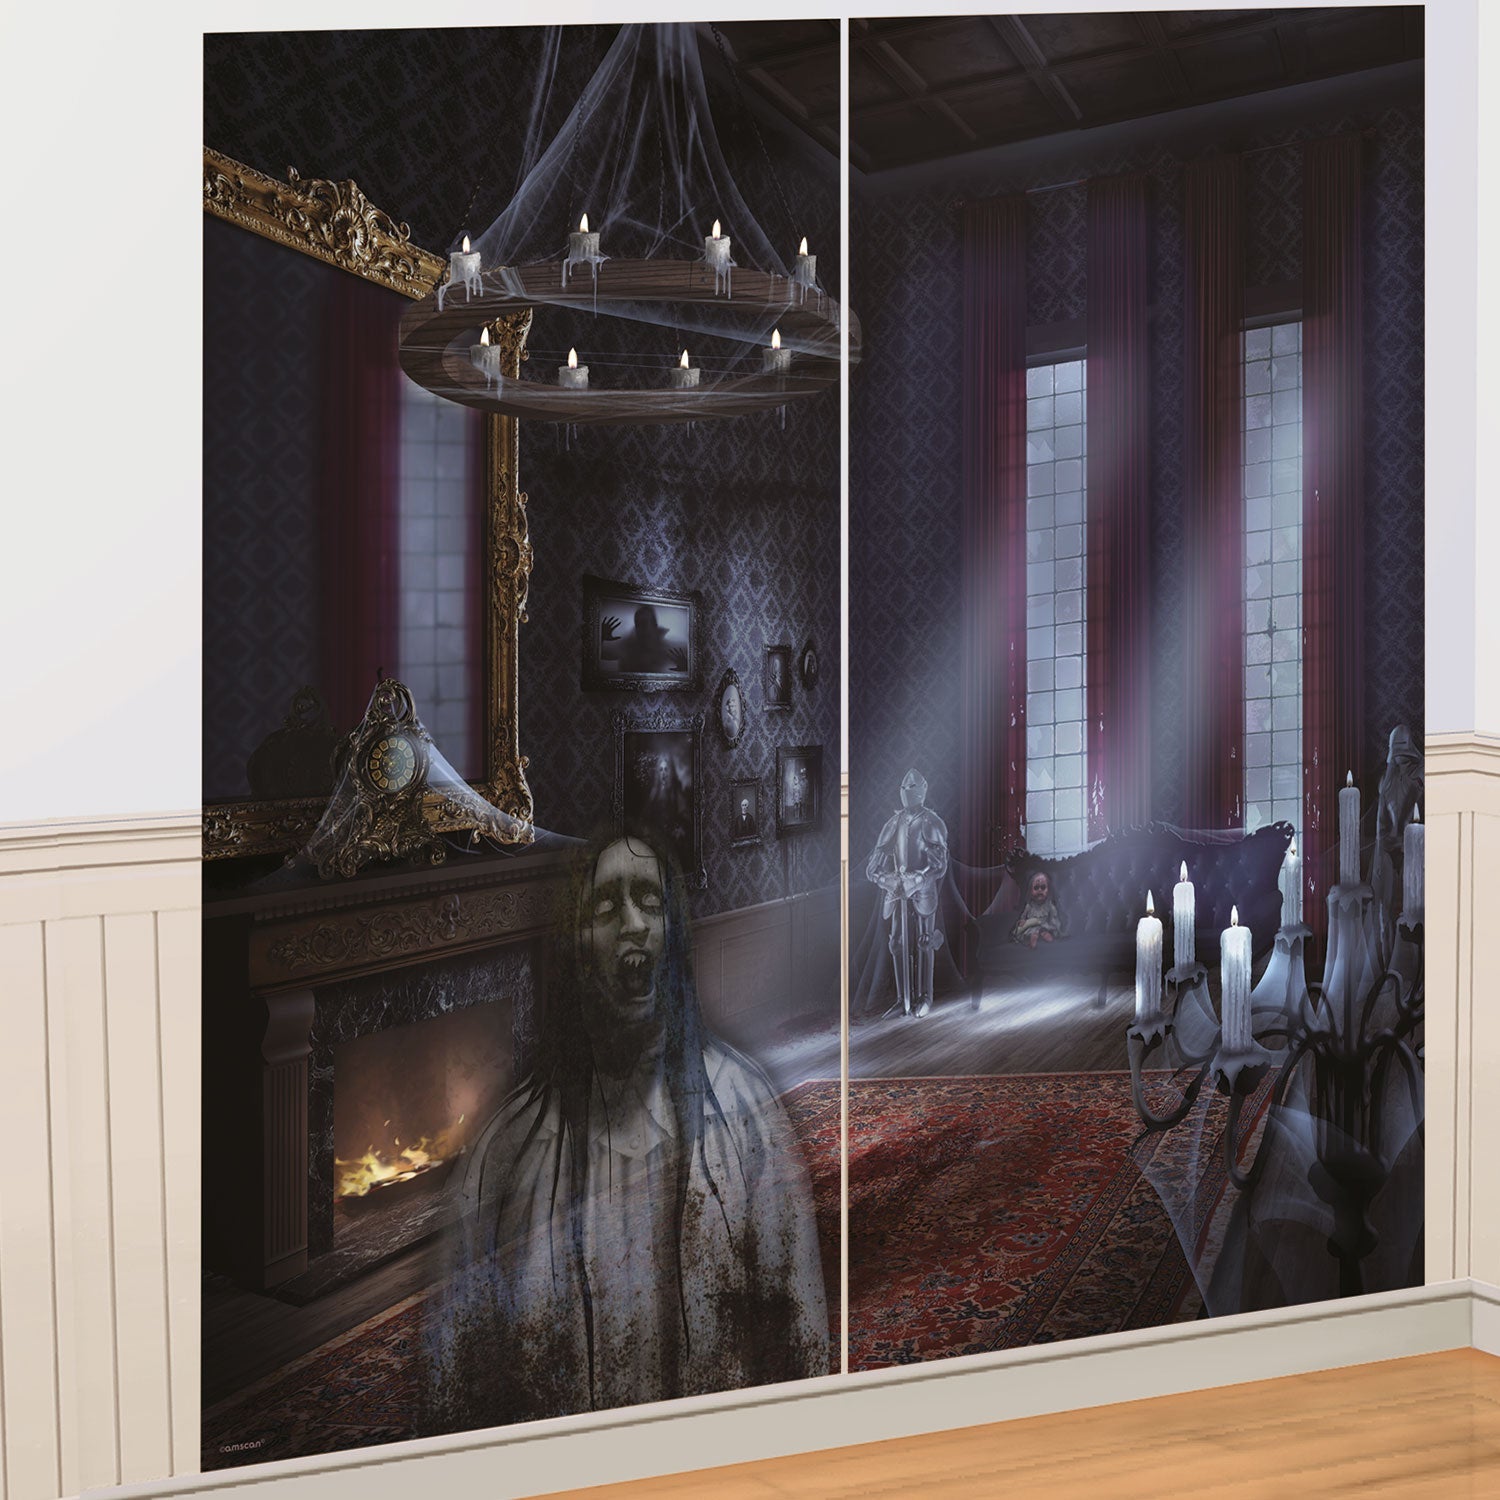 Dark Manor Wall Decoration Kit consists of 2 scene Setter decorations measuring 1.65m by 82cm each